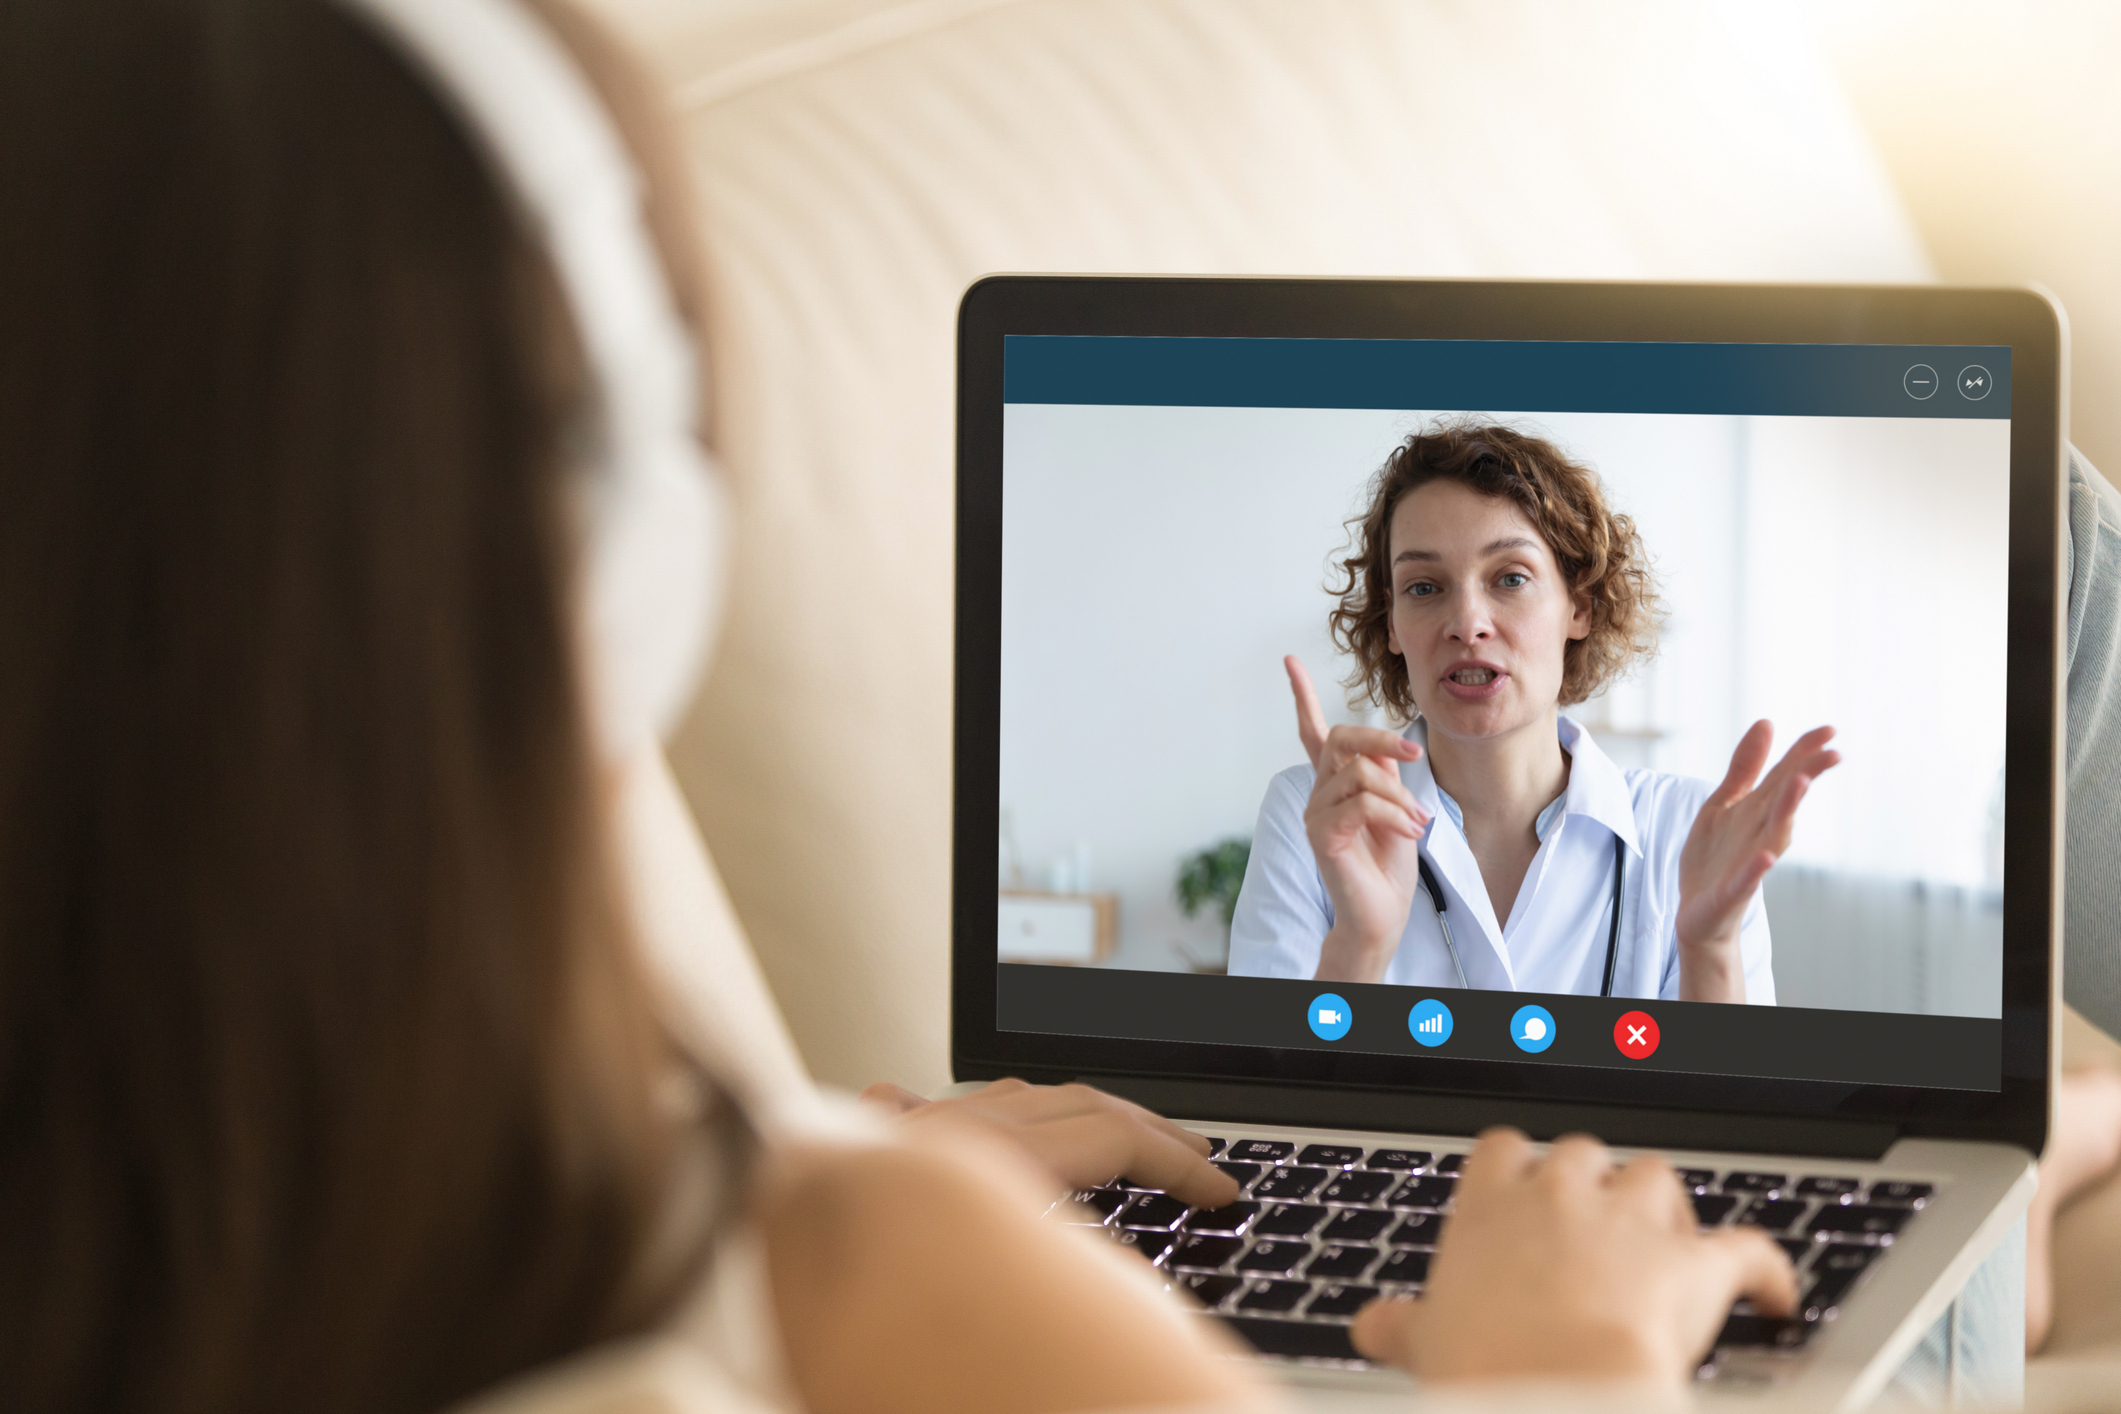 How Planning for Failure Can Make Telehealth Safer